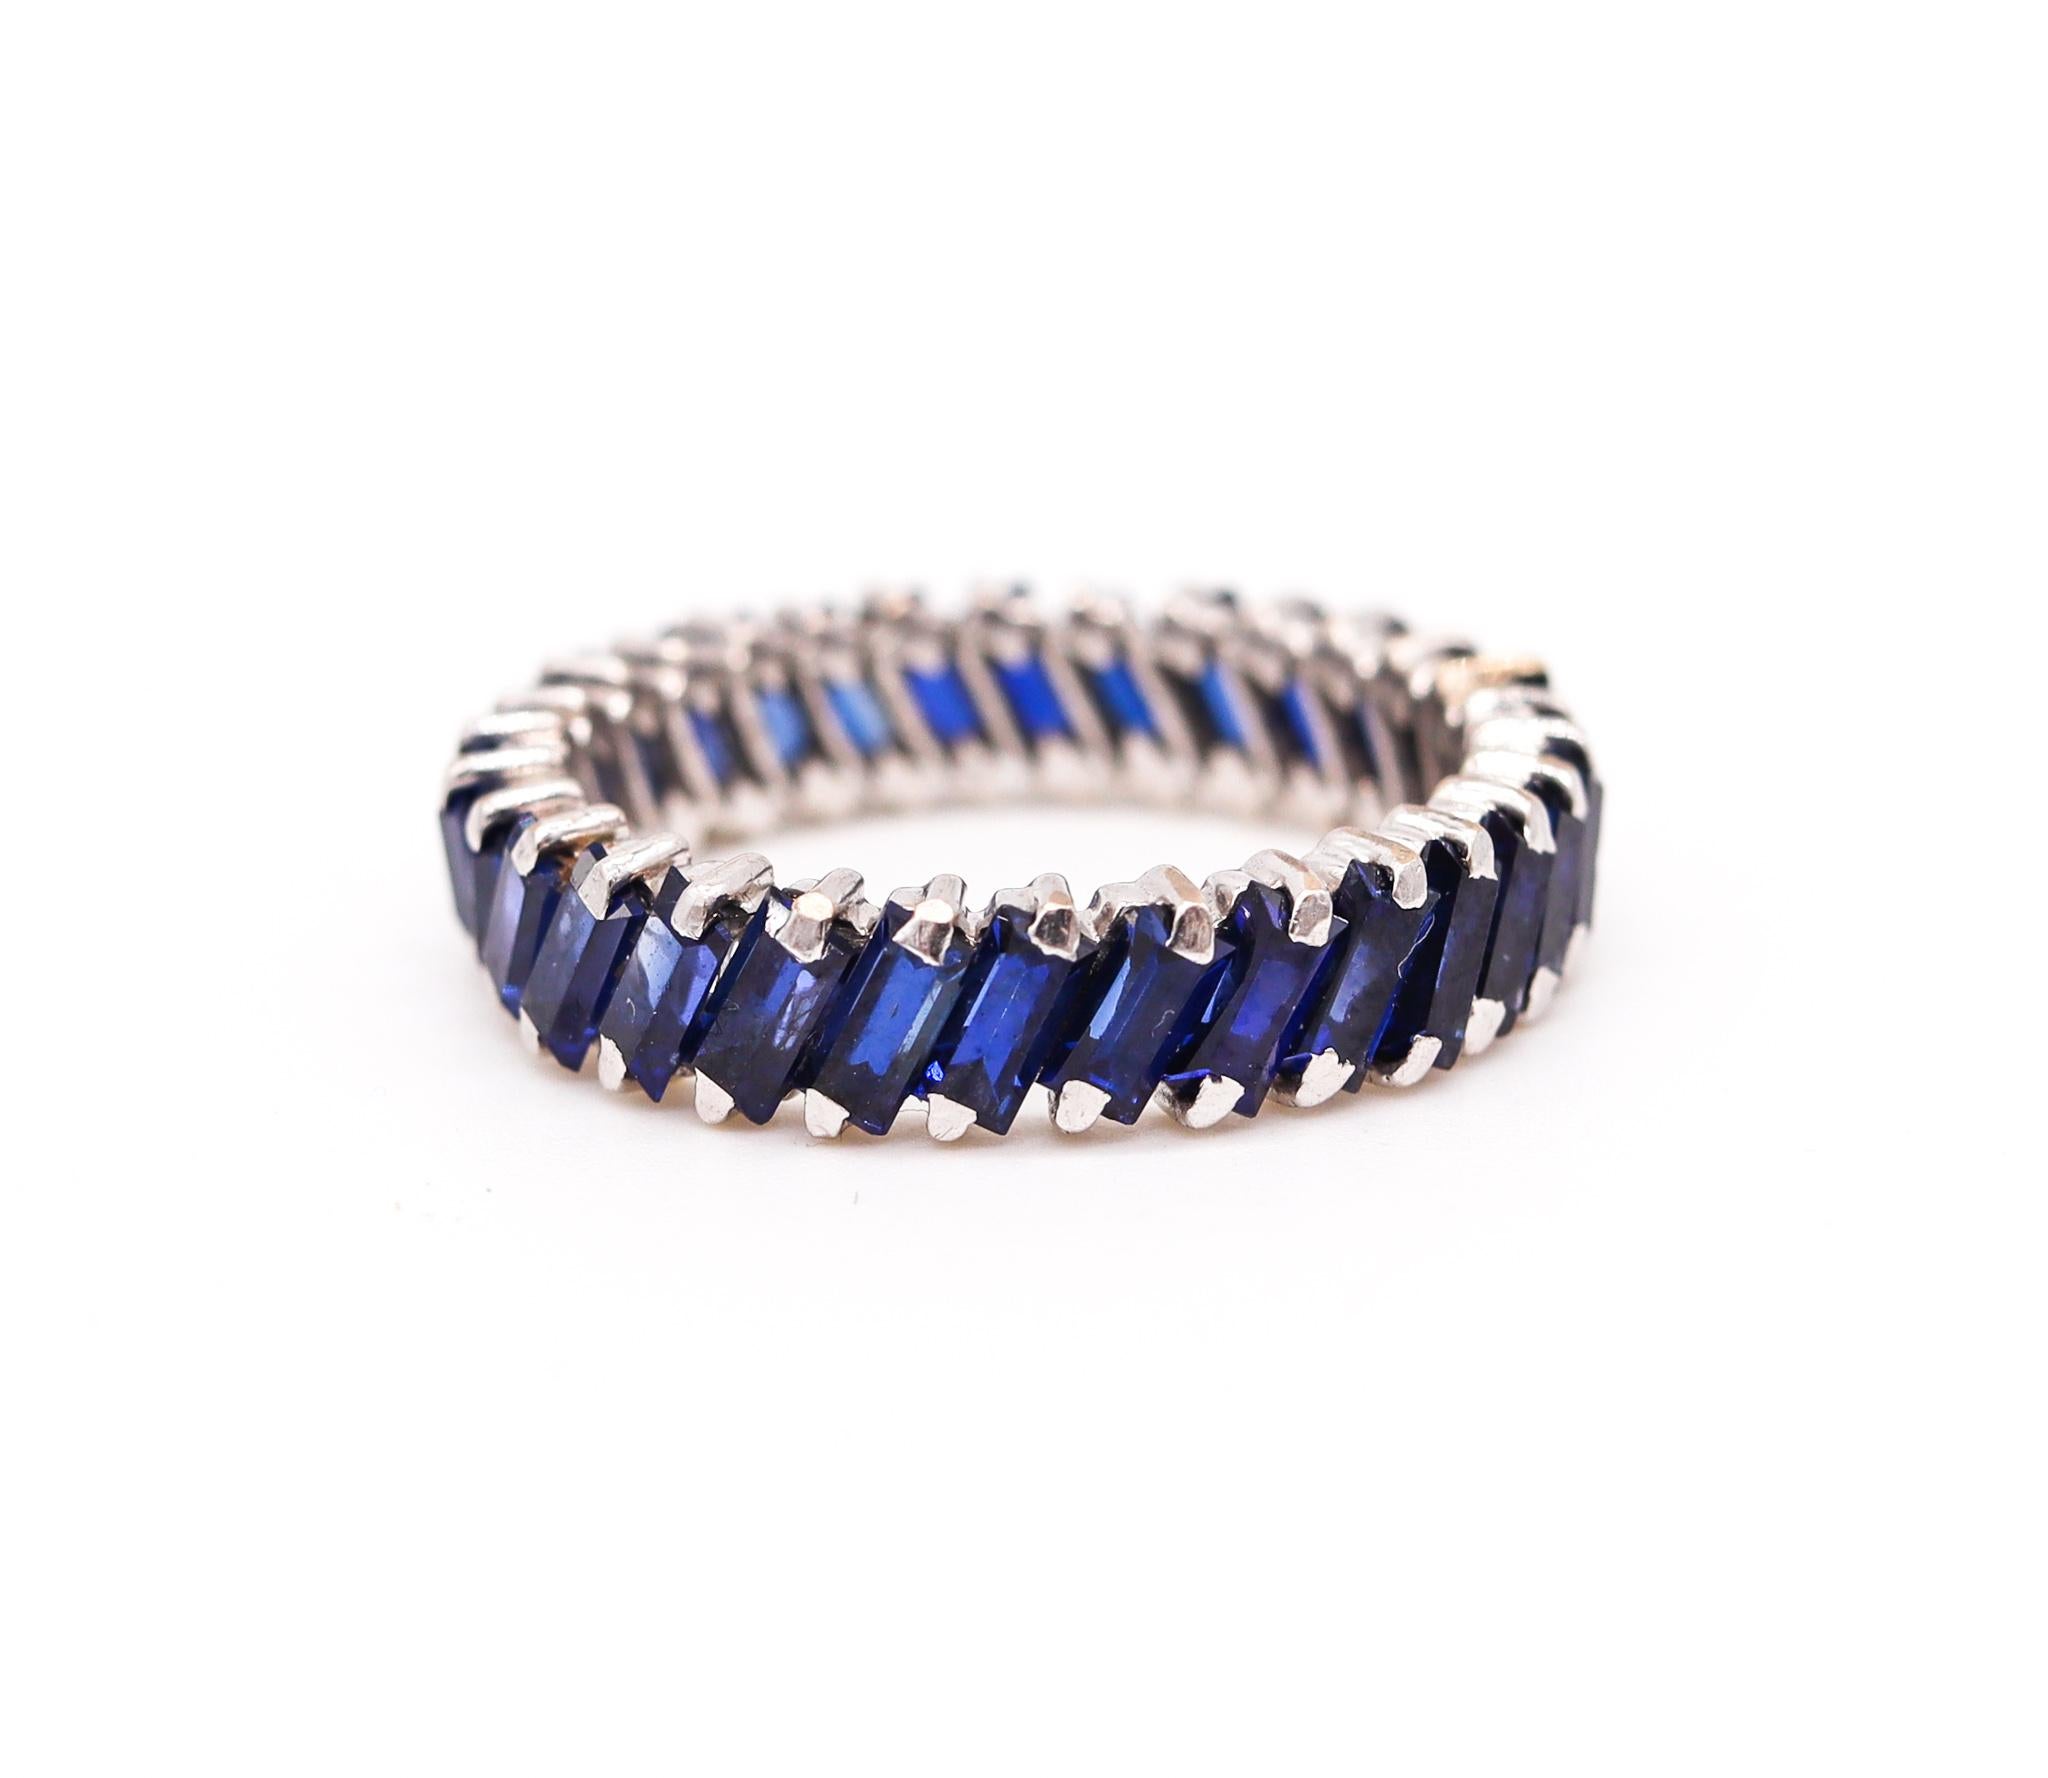 Custom made eternity ring with blue sapphires.

A rare full eternity ring crafted with textured sides in solid .950,999 platinum. It is continuously mounted diagonally in single point prong settings with 30 straight baguettes cut from natural blue